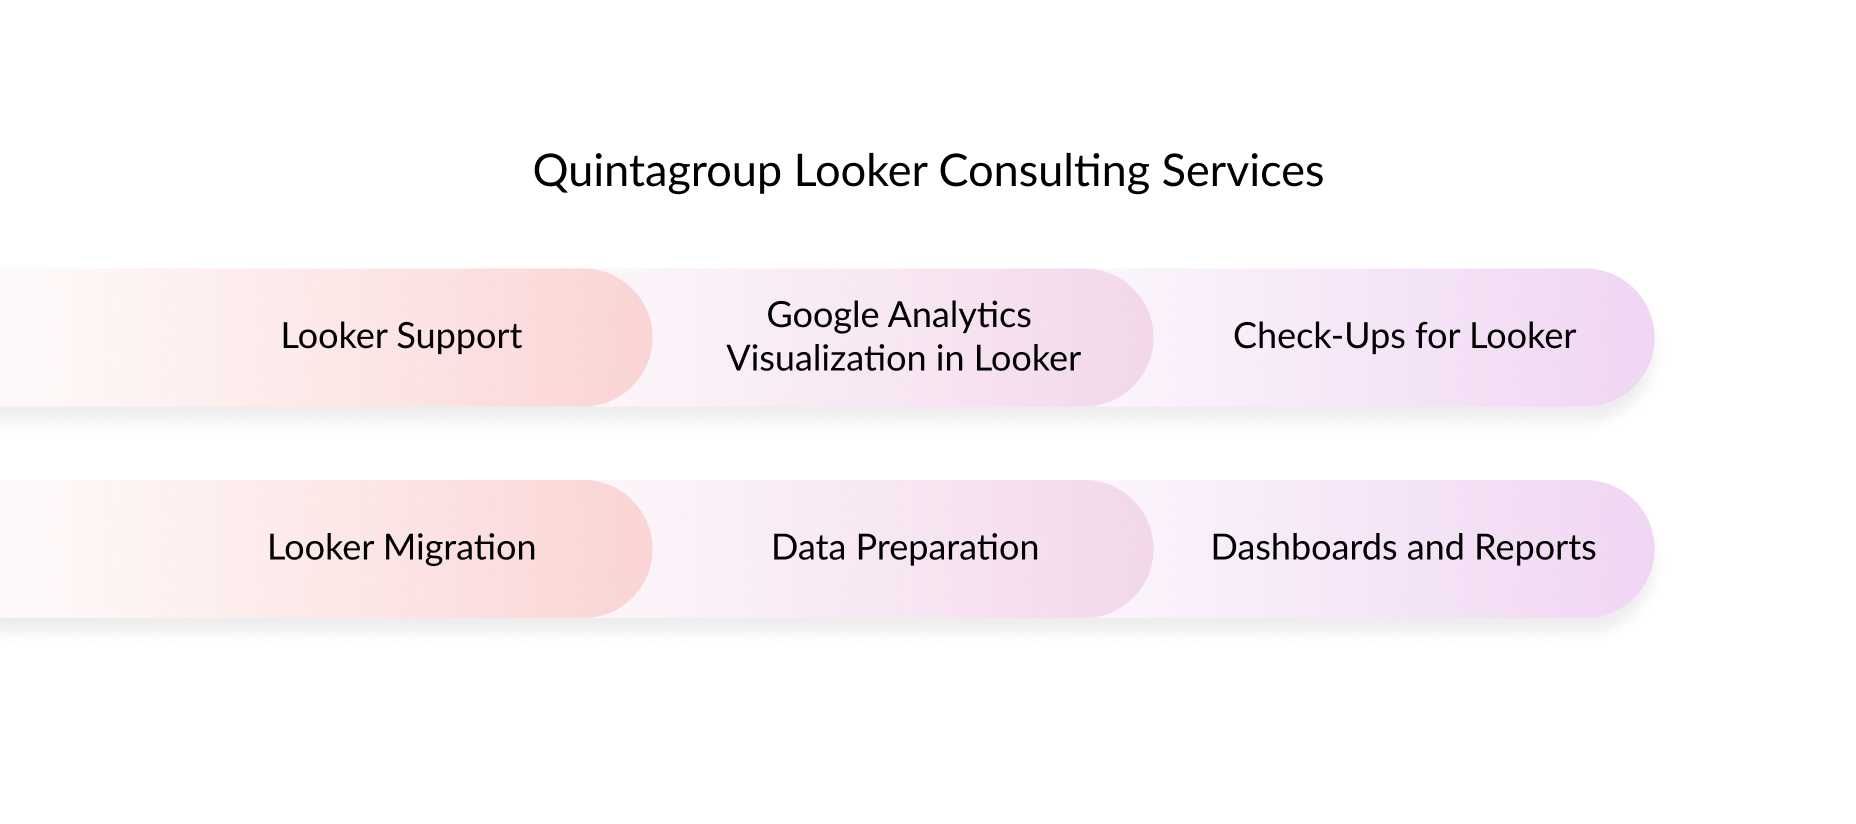 Quintagroup Looker Consulting Services.jpg